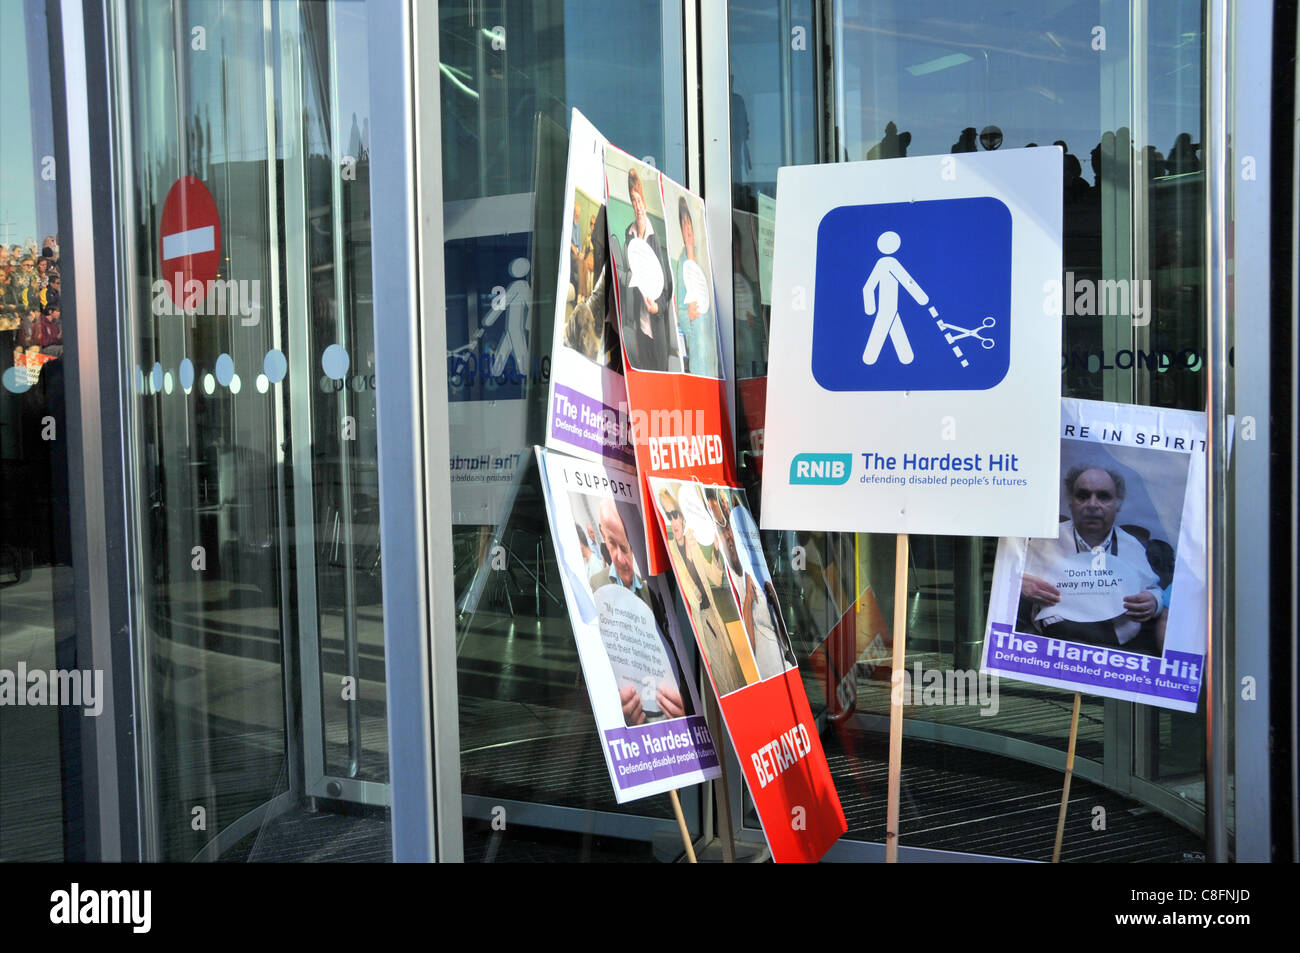 Welfare Reform Bill protest Placards at The Hardest Hit protest against benefit cuts for disabled people. Stock Photo